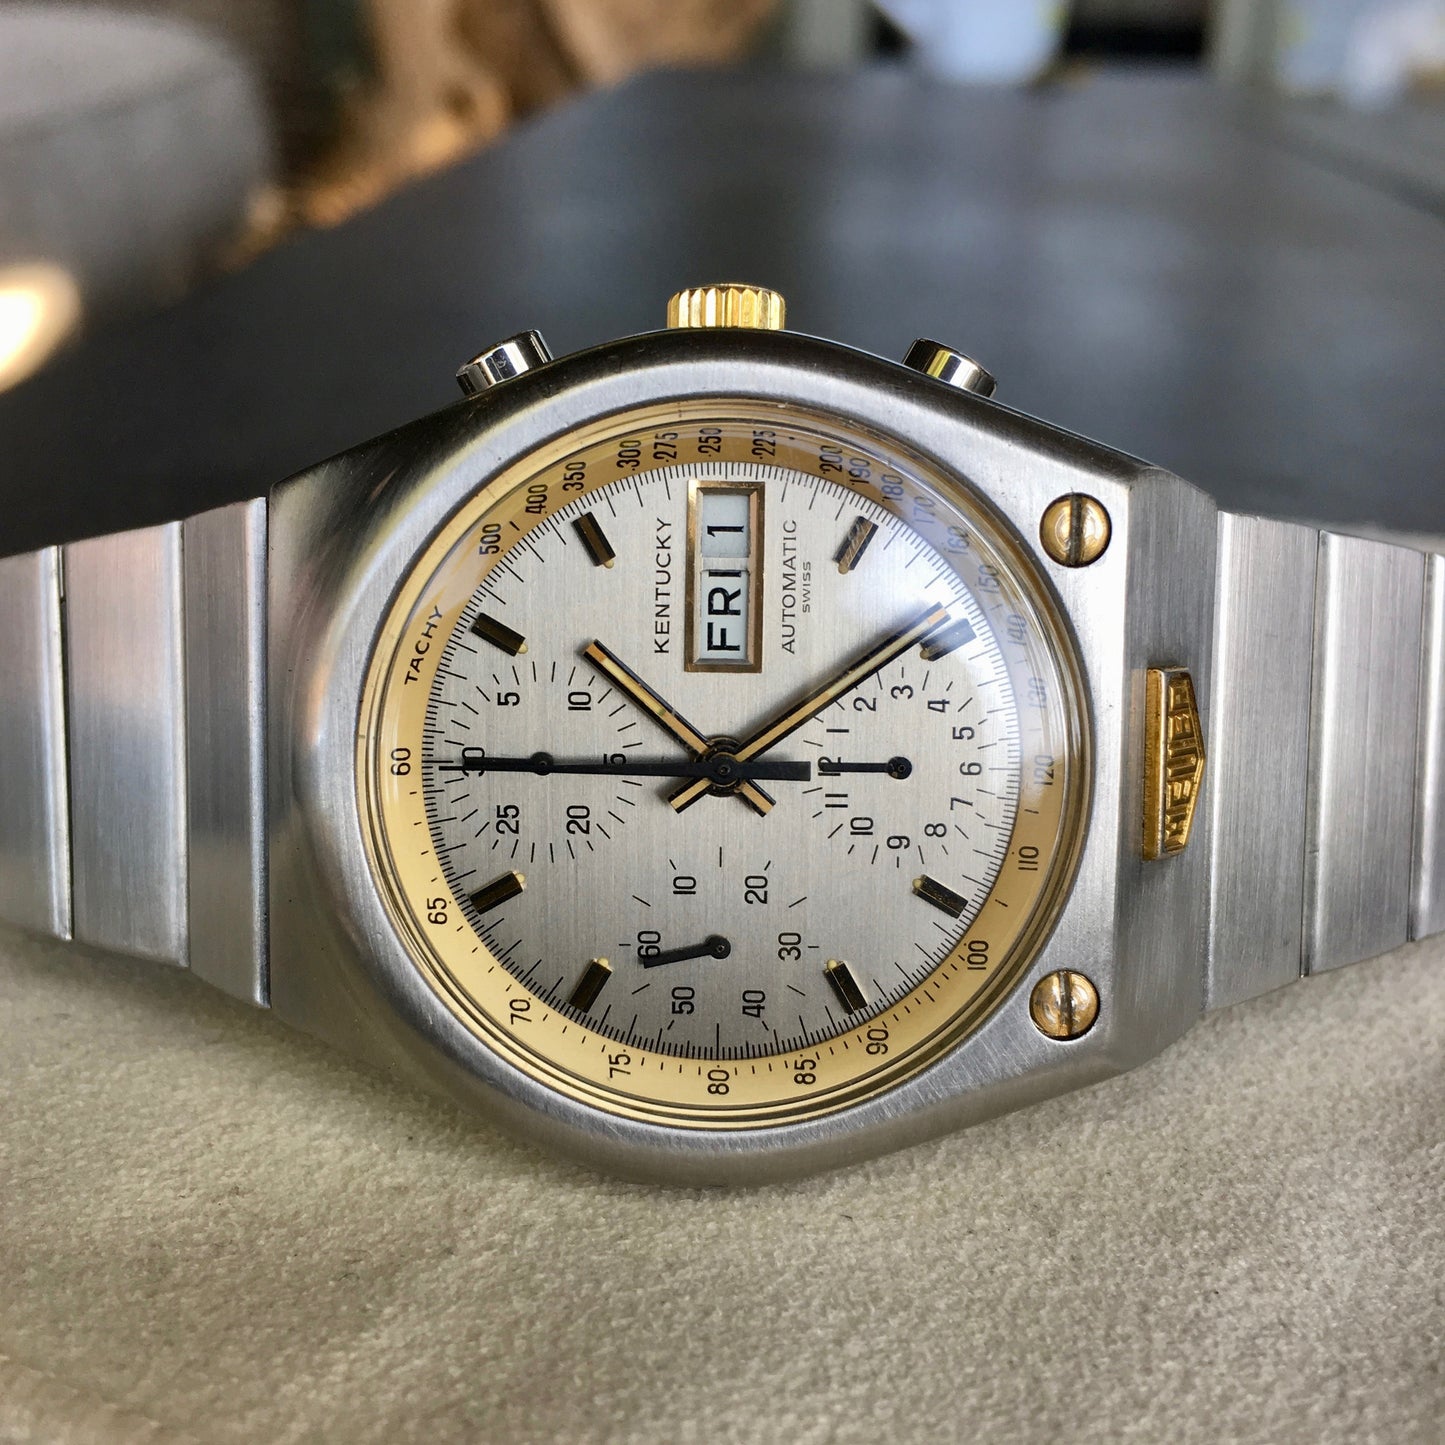 Vintage Heuer Kentucky 750.705 Steel Gold Automatic Valjoux 7750 Chronograph Watch - Hashtag Watch Company